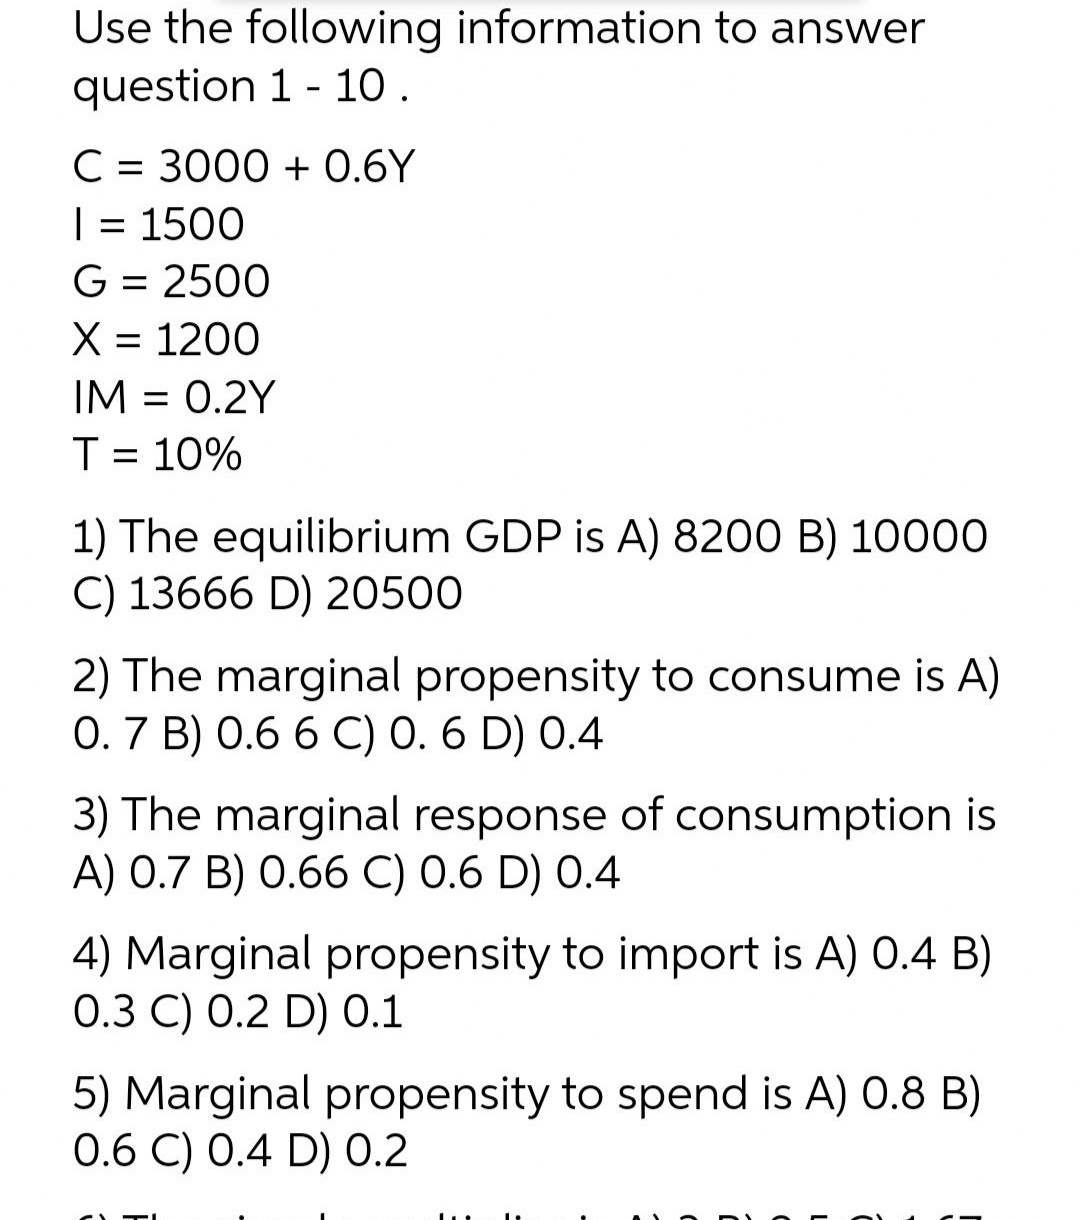 Use the following information to answer
question 1 - 10 .
C = 3000 + 0.6Y
= 1500
G = 2500
X = 1200
IM = 0.2Y
T= 10%
1) The equilibrium GDP is A) 8200 B) 10000
C) 13666 D) 20500
2) The marginal propensity to consume is A)
0.7 B) 0.6 6 C) 0. 6 D) 0.4
3) The marginal response of consumption is
A) 0.7 B) 0.66 C) 0.6 D) 0.4
4) Marginal propensity to import is A) 0.4 B)
0.3 C) 0.2 D) 0.1
5) Marginal propensity to spend is A) 0.8 B)
0.6 C) 0.4 D) 0.2
